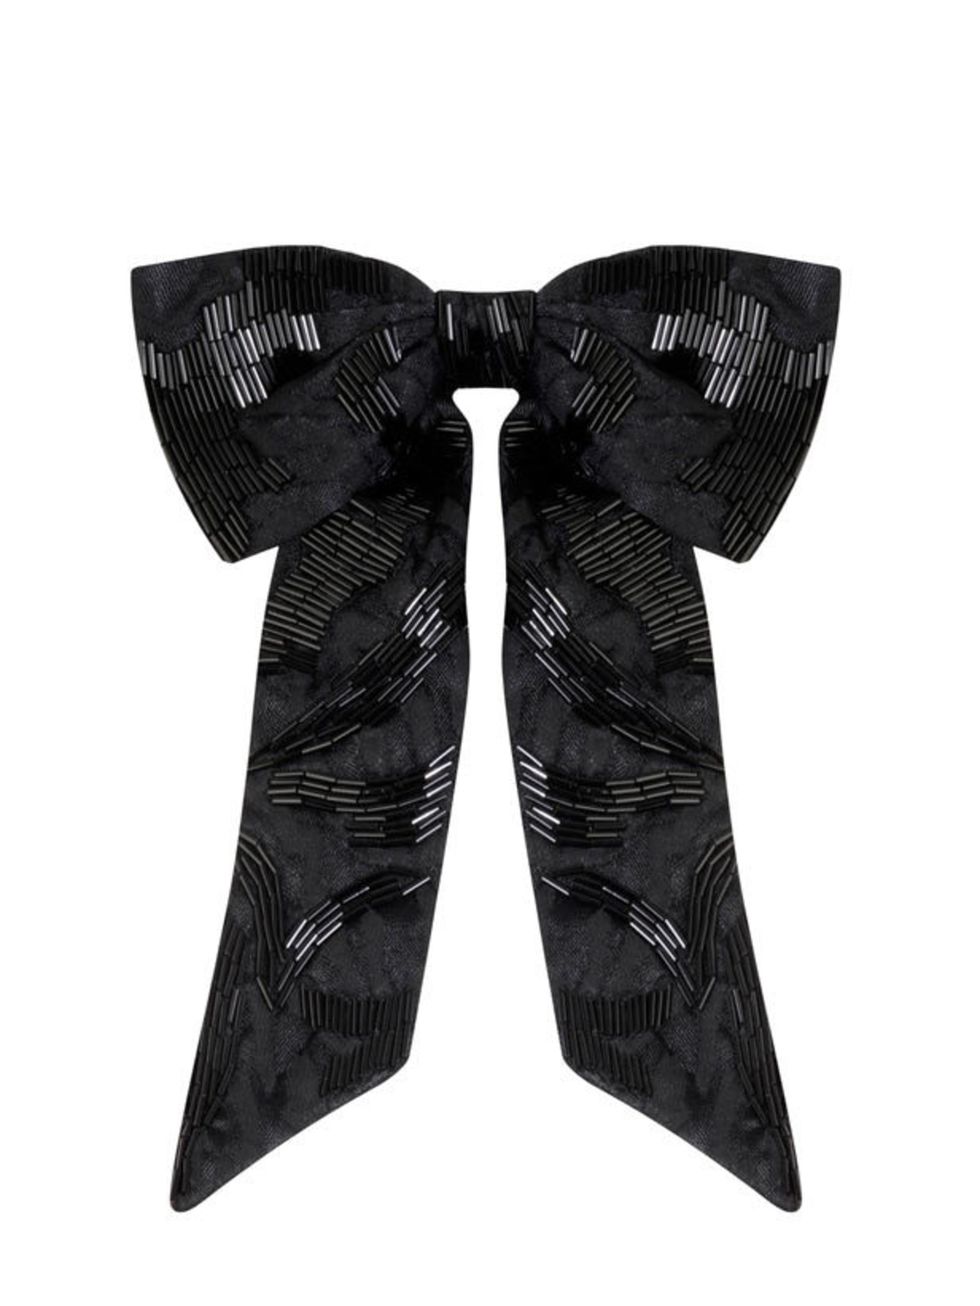 <p>Religion bow, £25, at <a href="http://www.houseoffraser.co.uk/">House of Fraser</a></p>